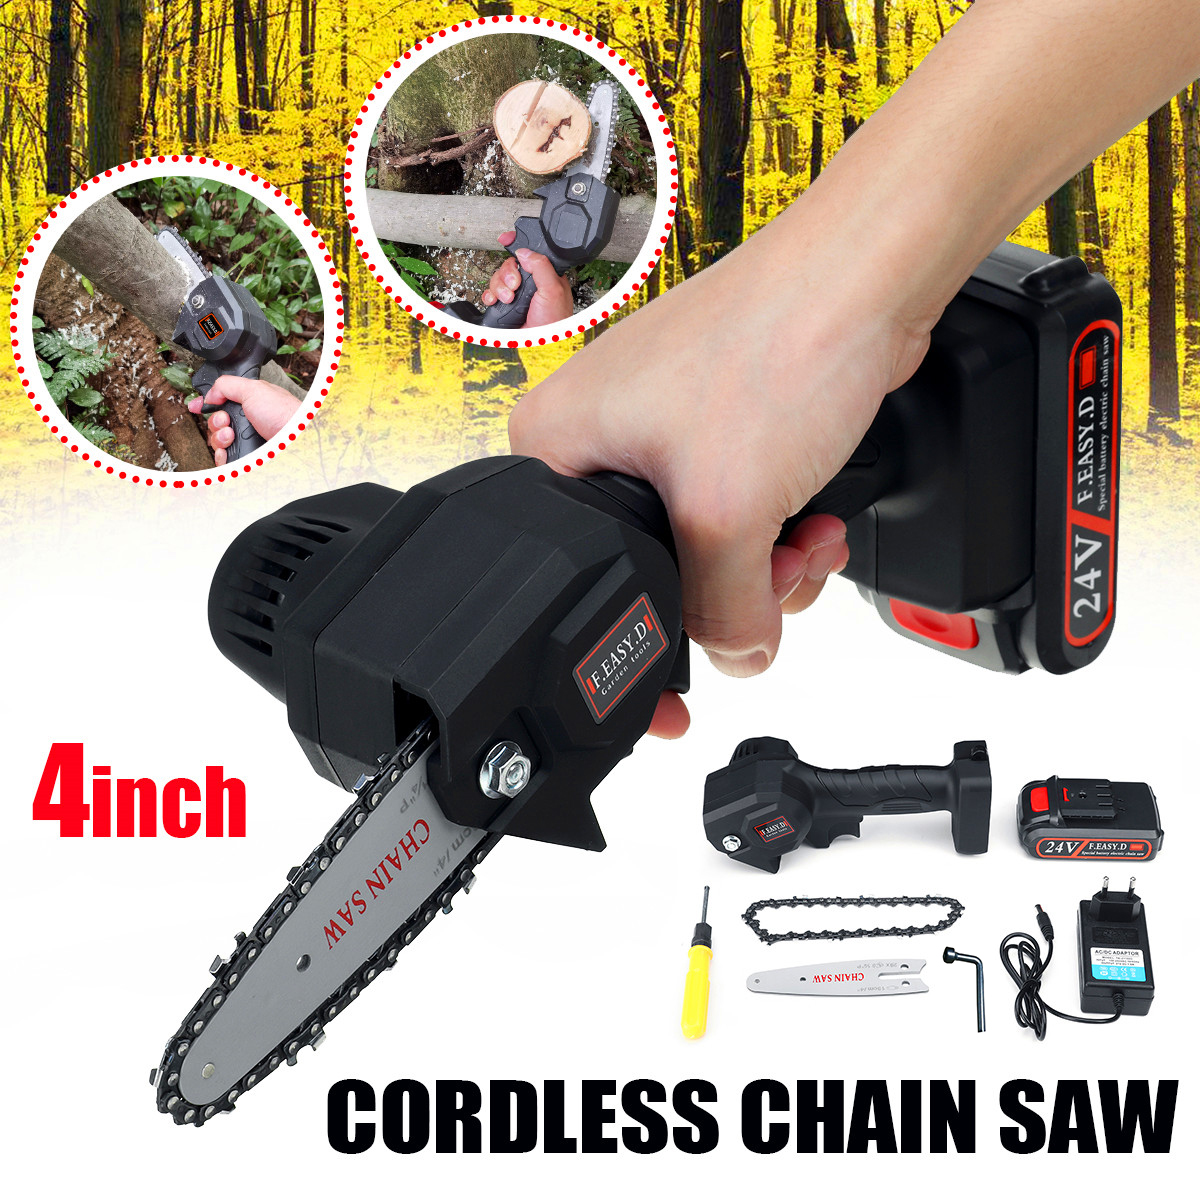 24V-Rechargeable-Cordless-Electric-Saw-Portable-Woodworking-Cutting-Tool-W-Battery-1788980-1